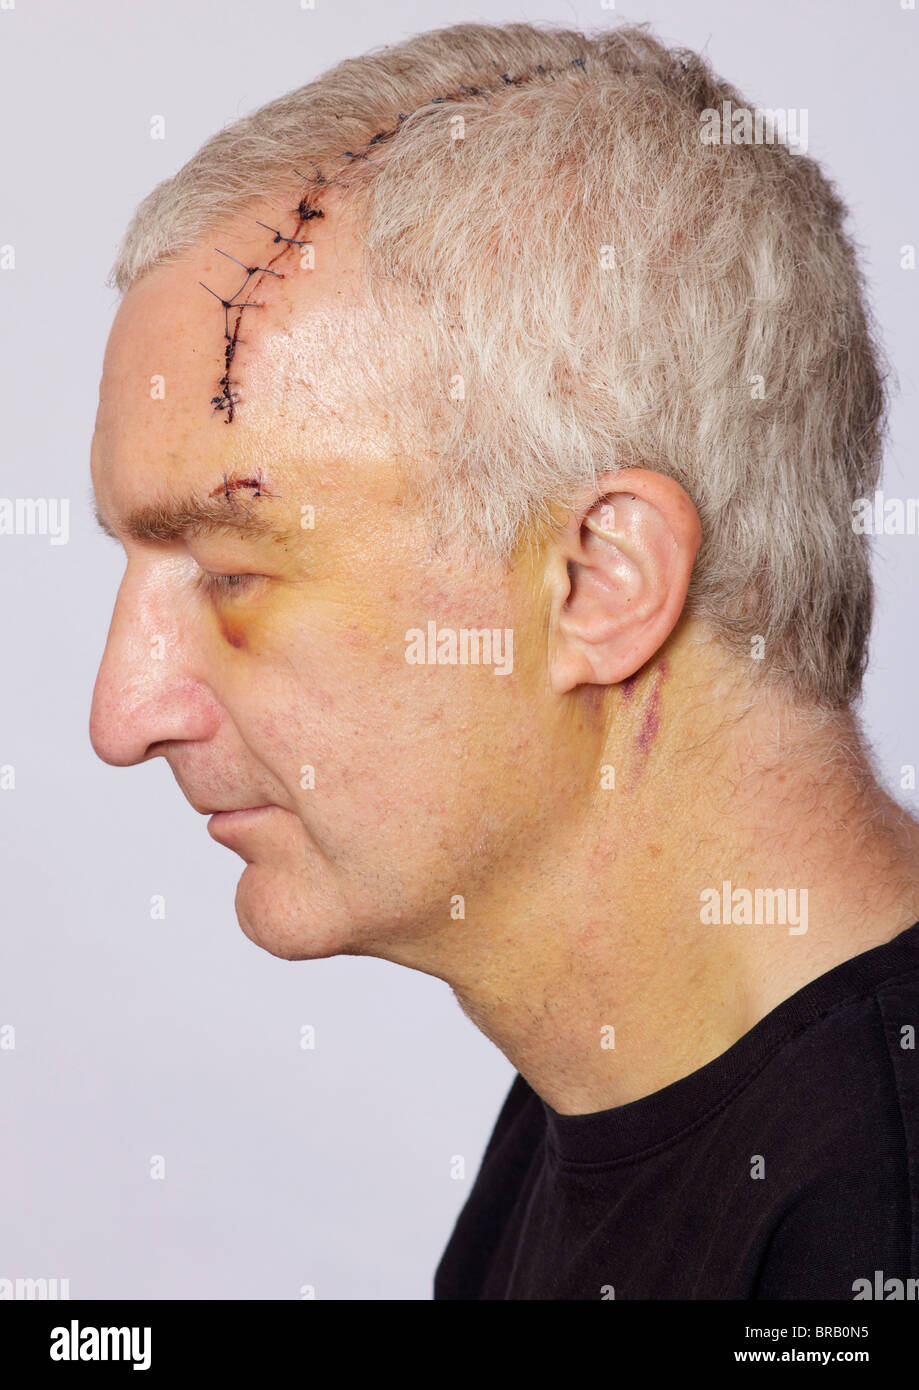 Man with long head wound and stitches Stock Photo